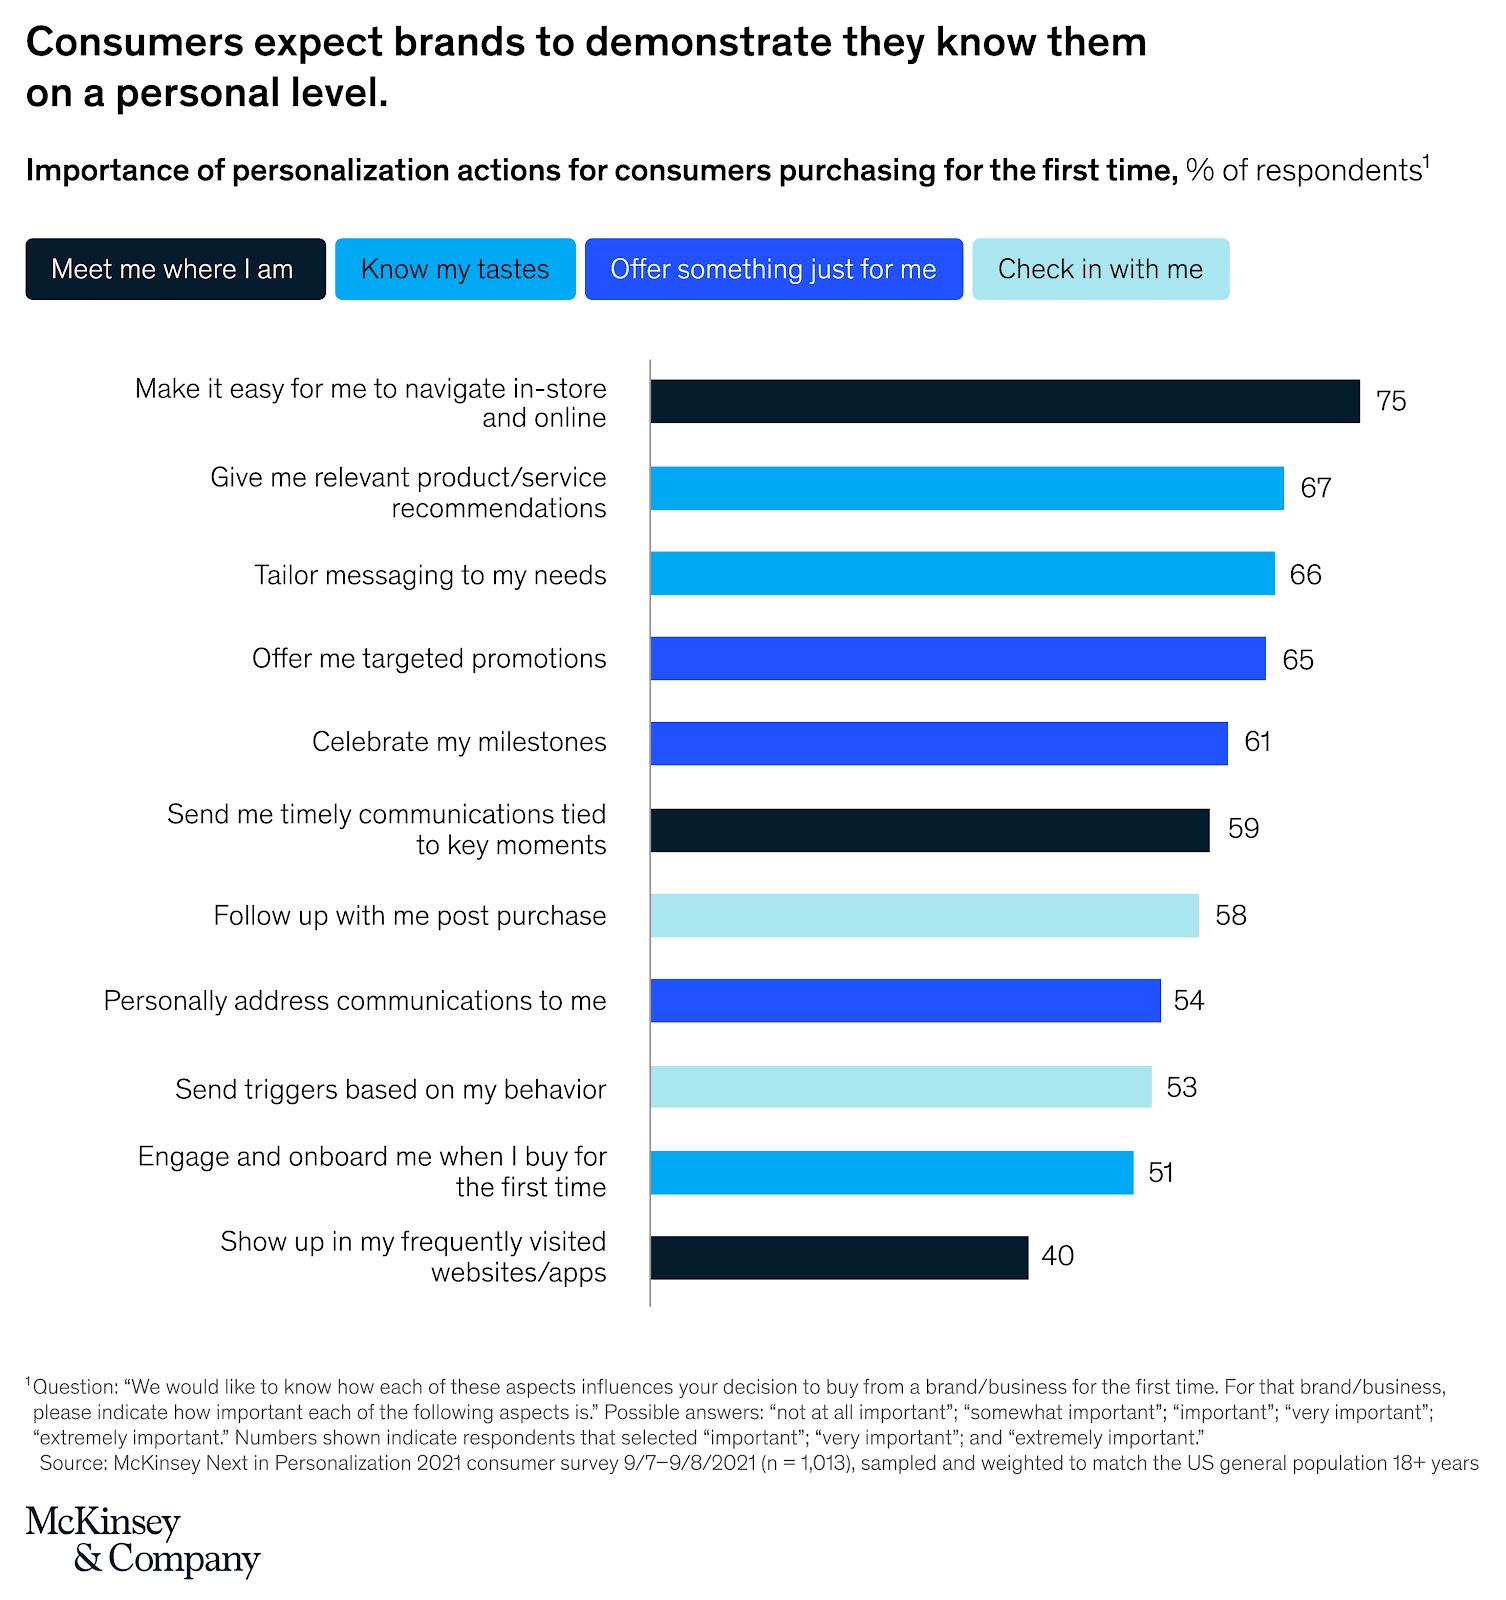 McKinsey's survey   results connected  consumers expecting brands to show  they cognize  them connected  a idiosyncratic   level